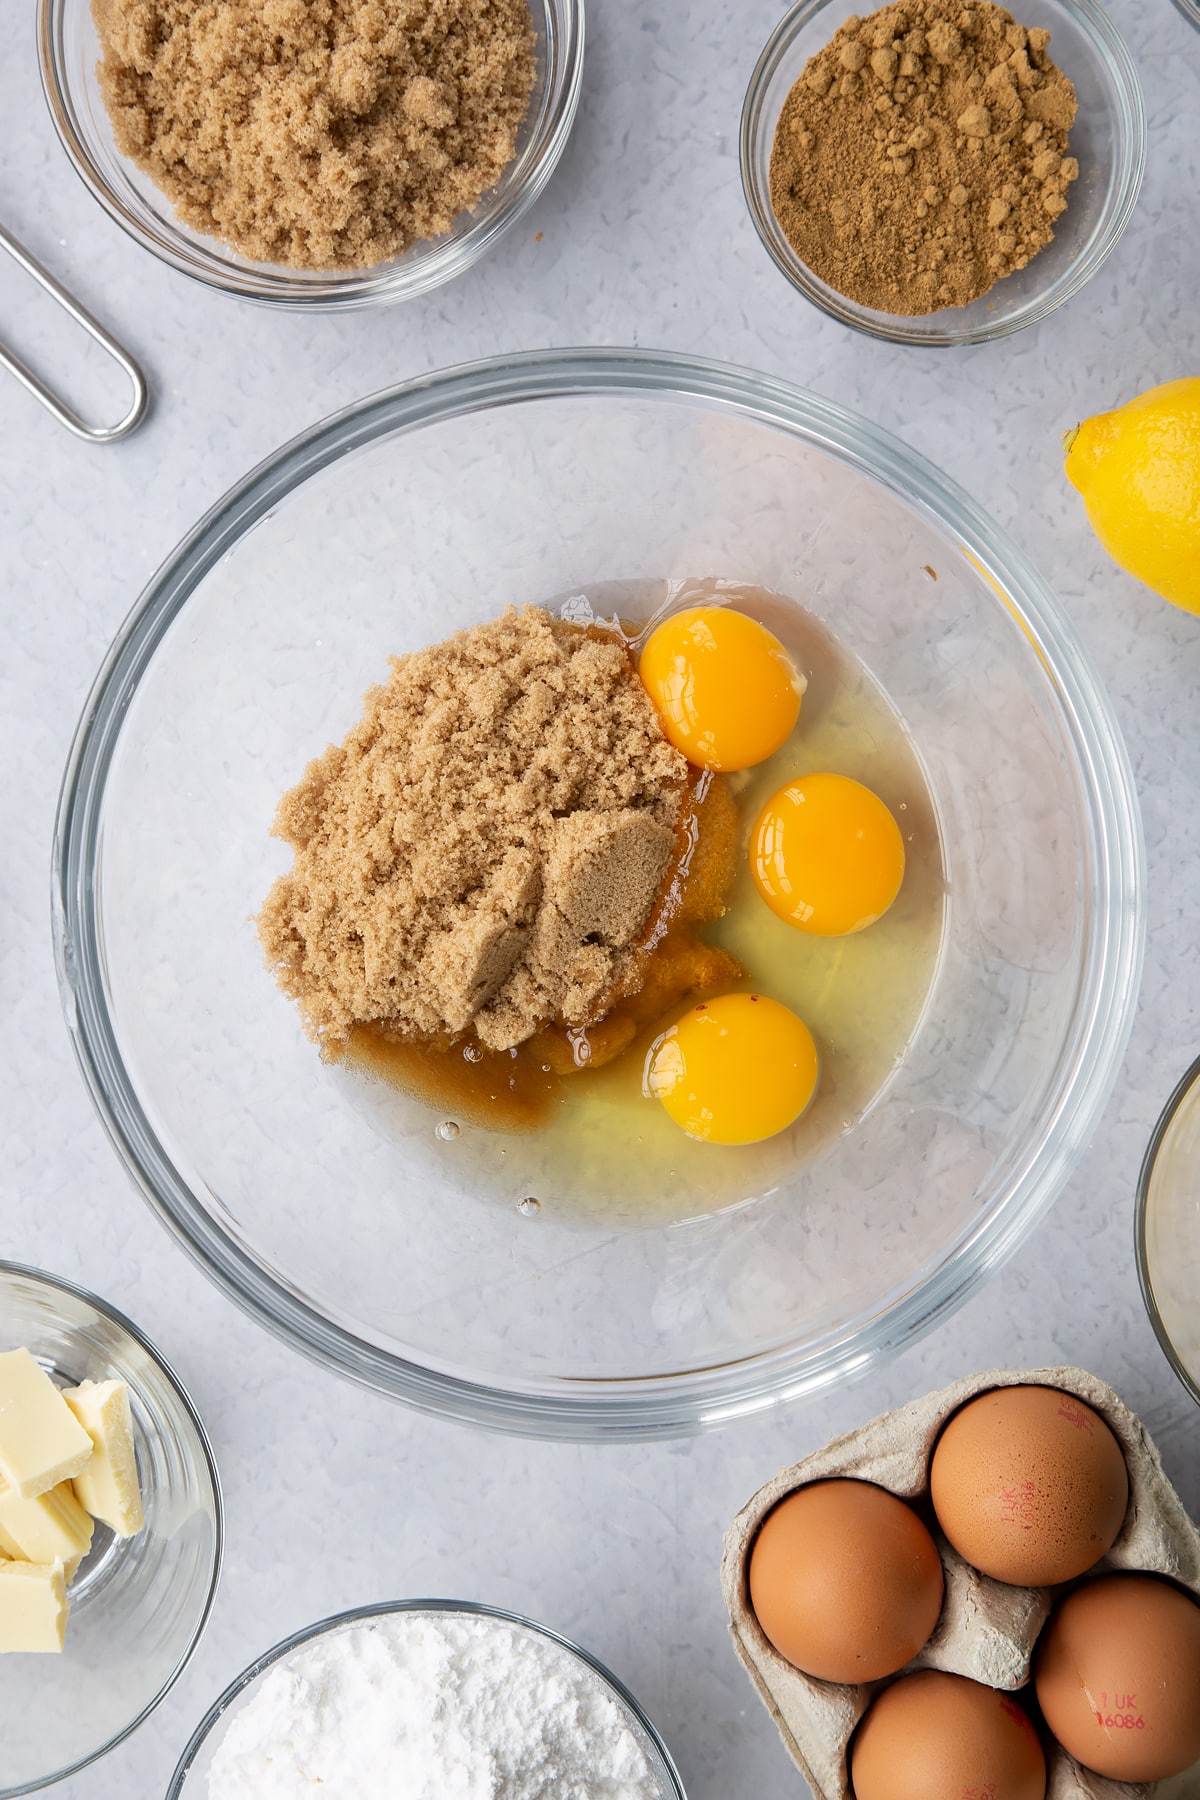 Eggs and light soft brown sugar in a glass mixing bowl. Ingredients to make Gingerbread Swiss roll surround the bowl.